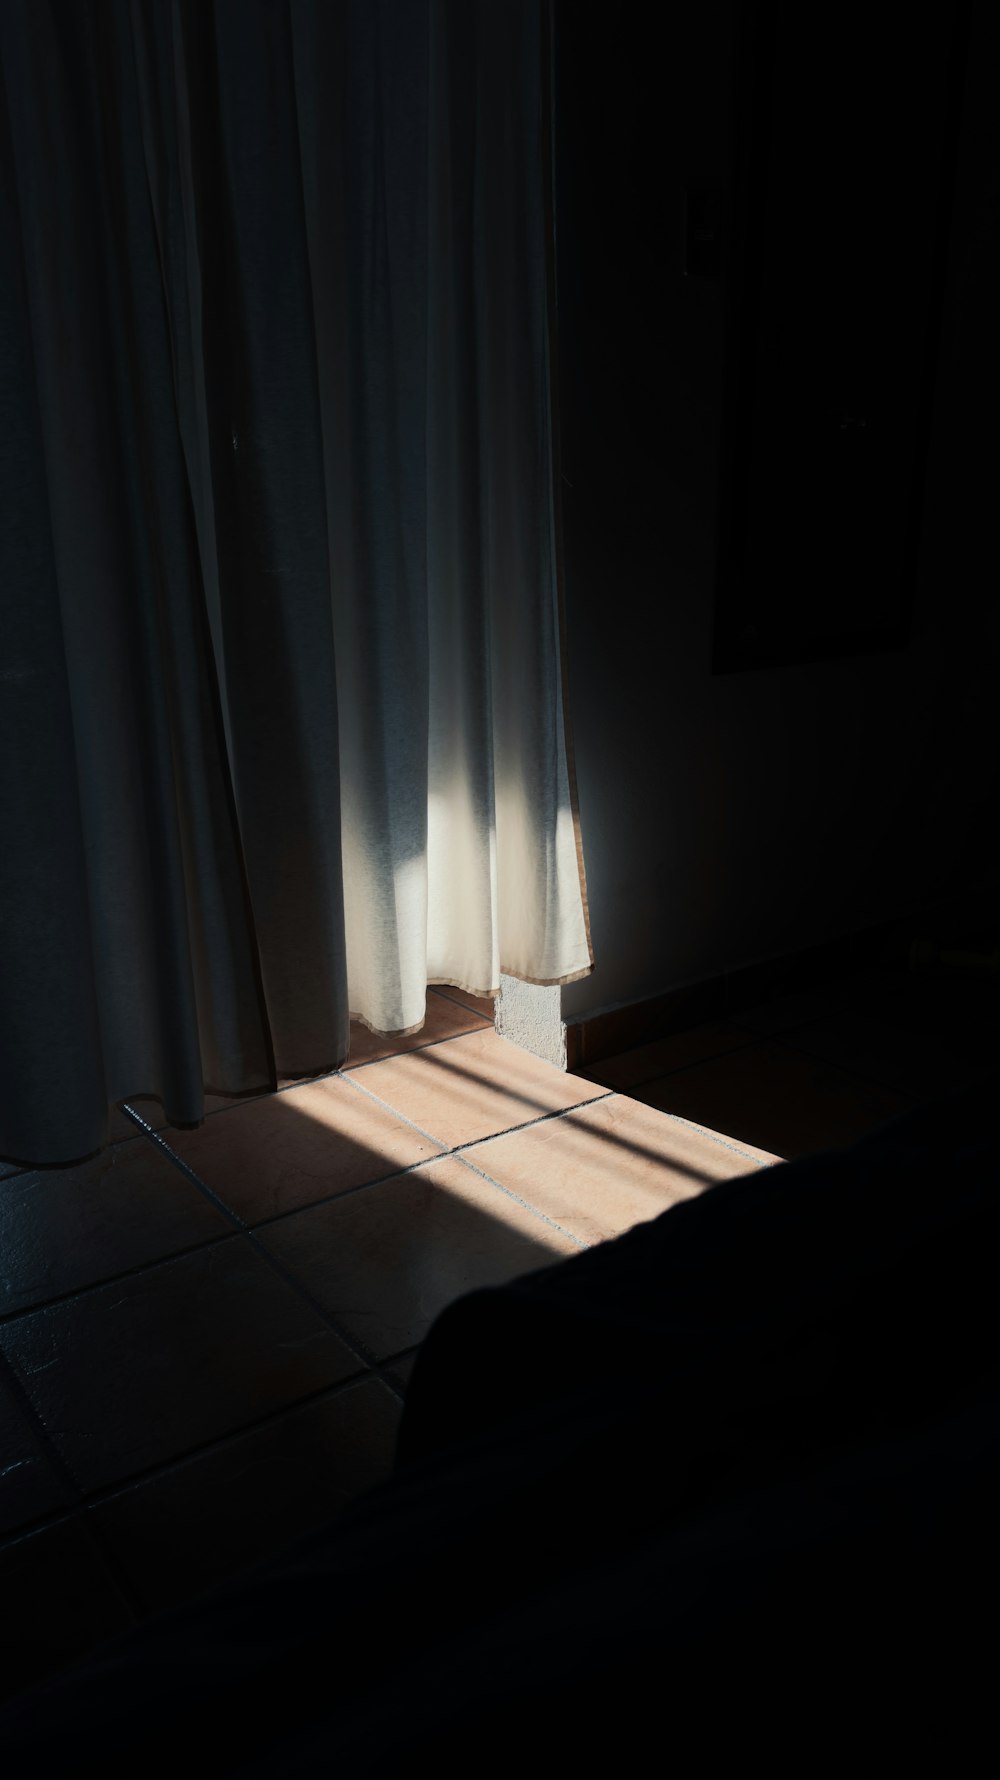 the sun is shining through the curtains in the room